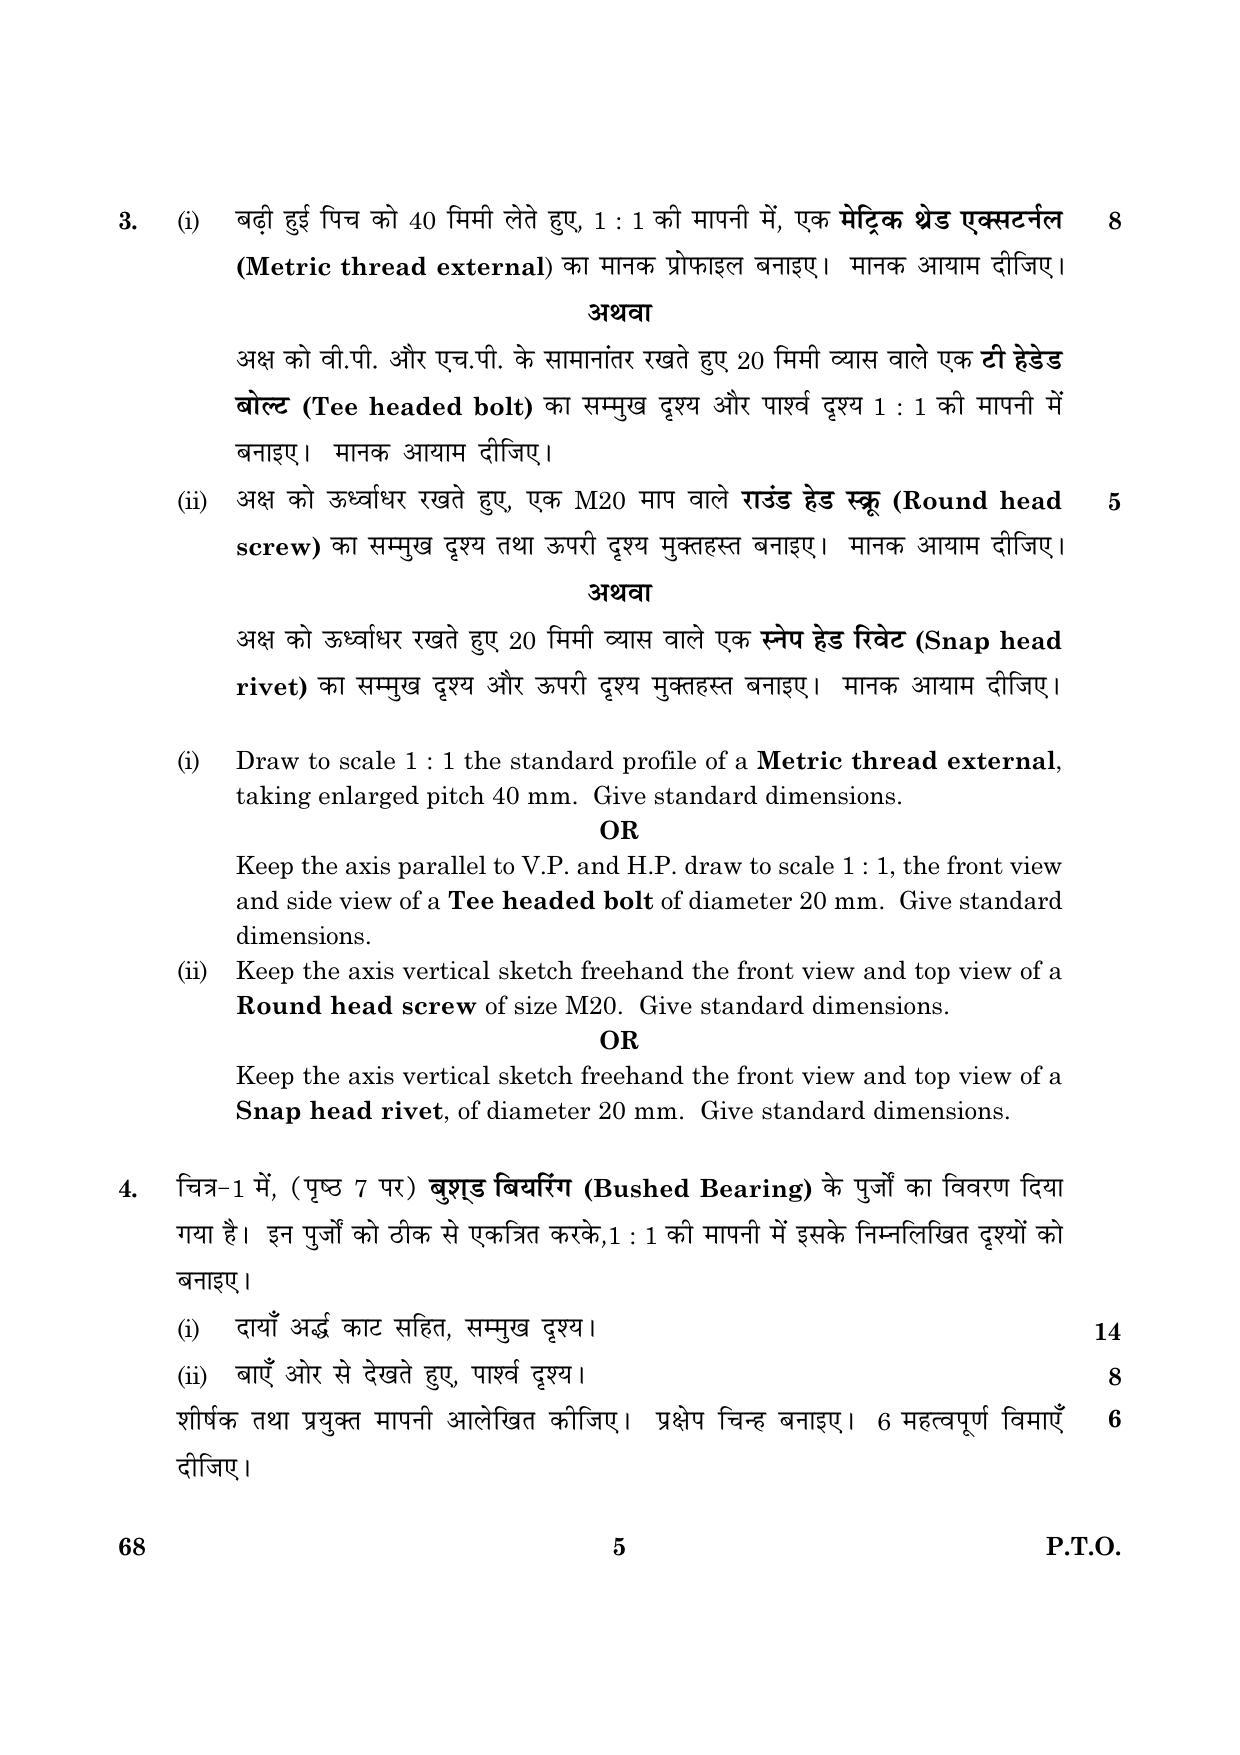 CBSE Class 12 068 Engineering Graphics 2016 Question Paper - Page 5